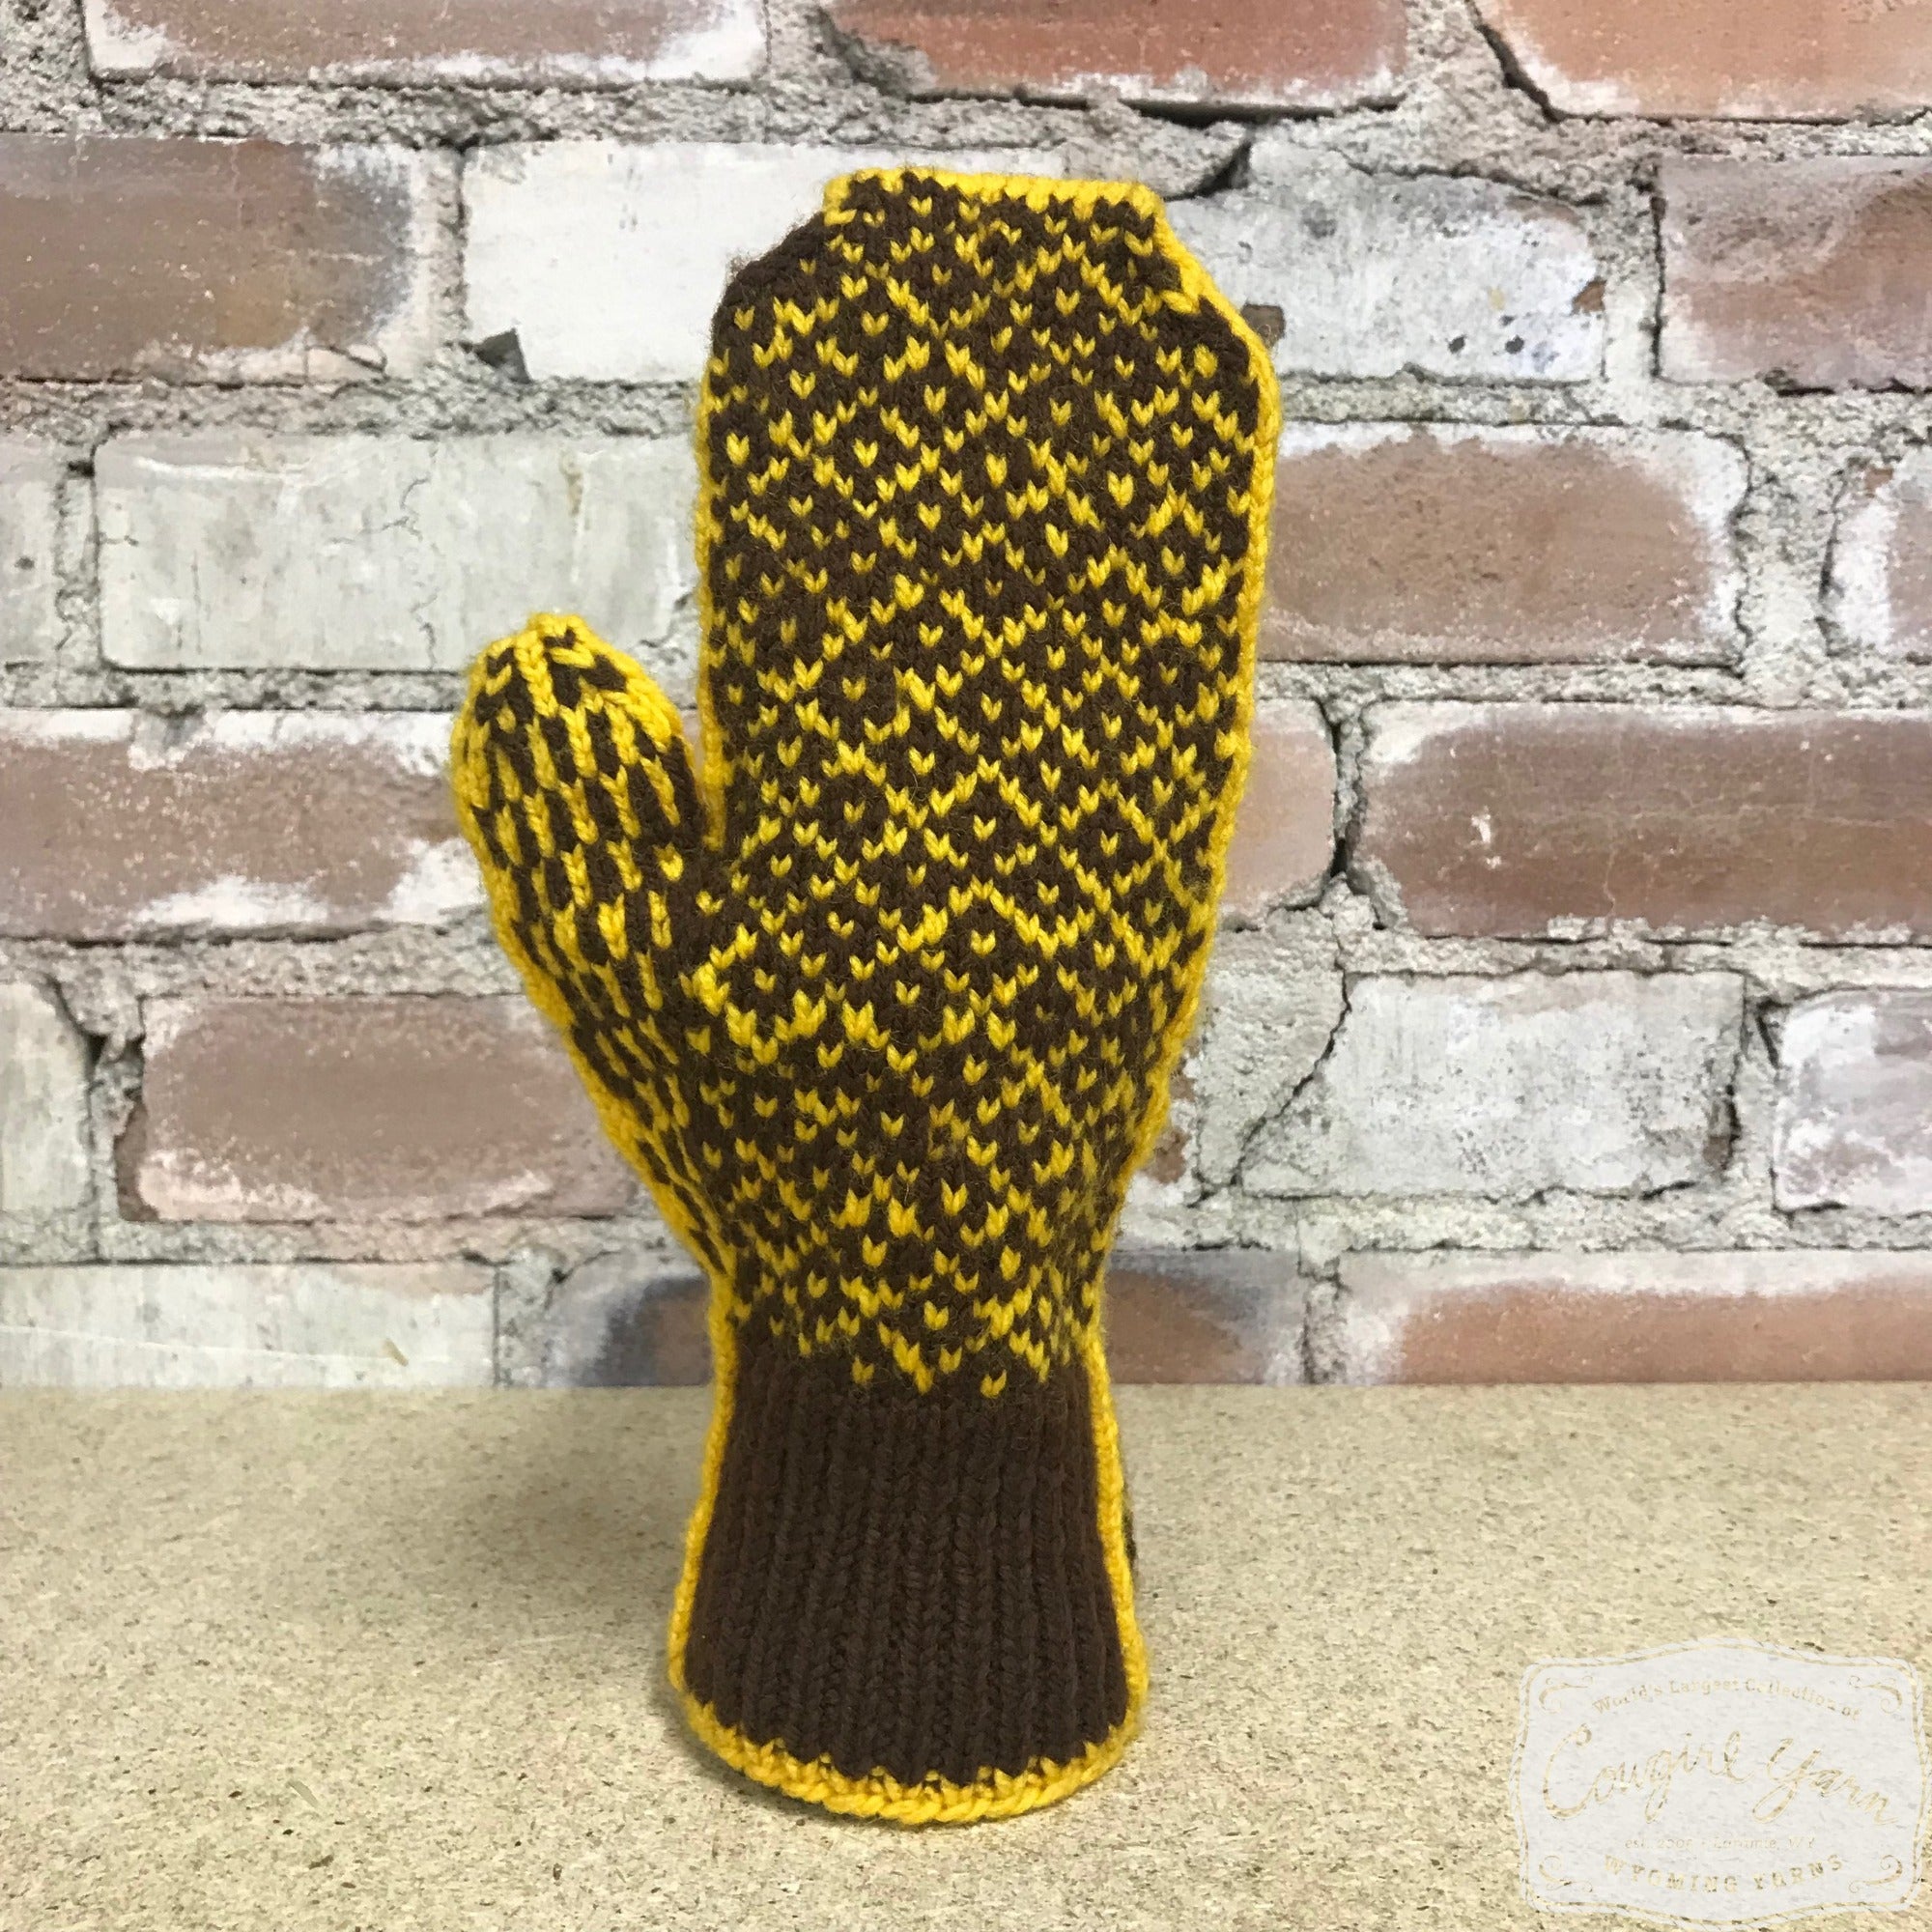 A brown and gold knitted mitten with a diamond motif set against a brick wall.